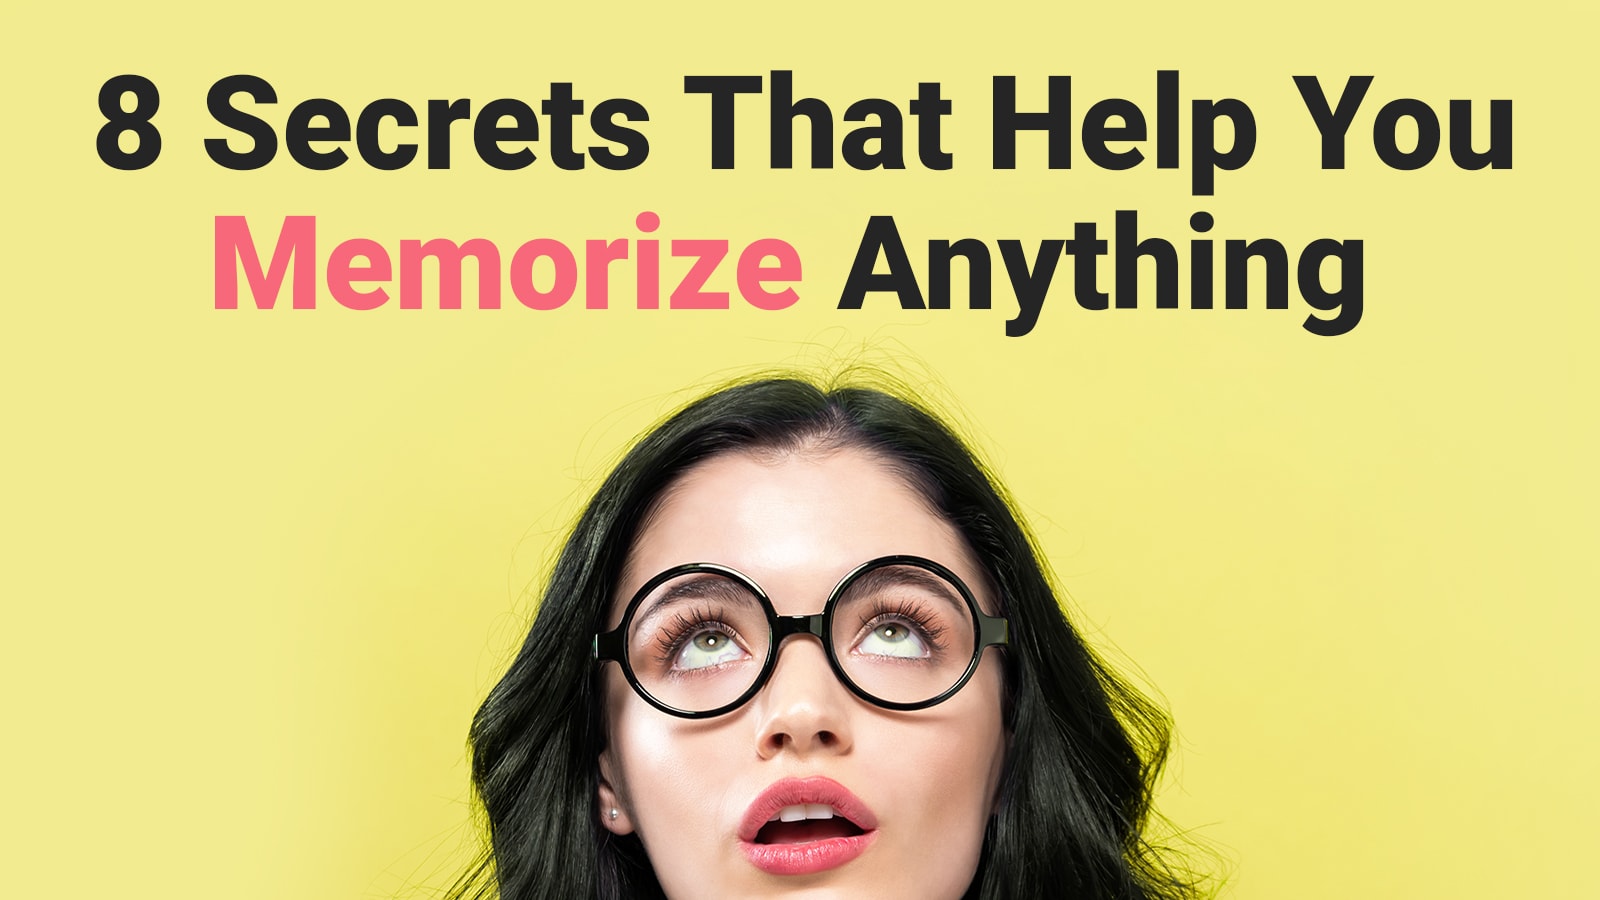 8 Secrets That Help You Memorize Anything